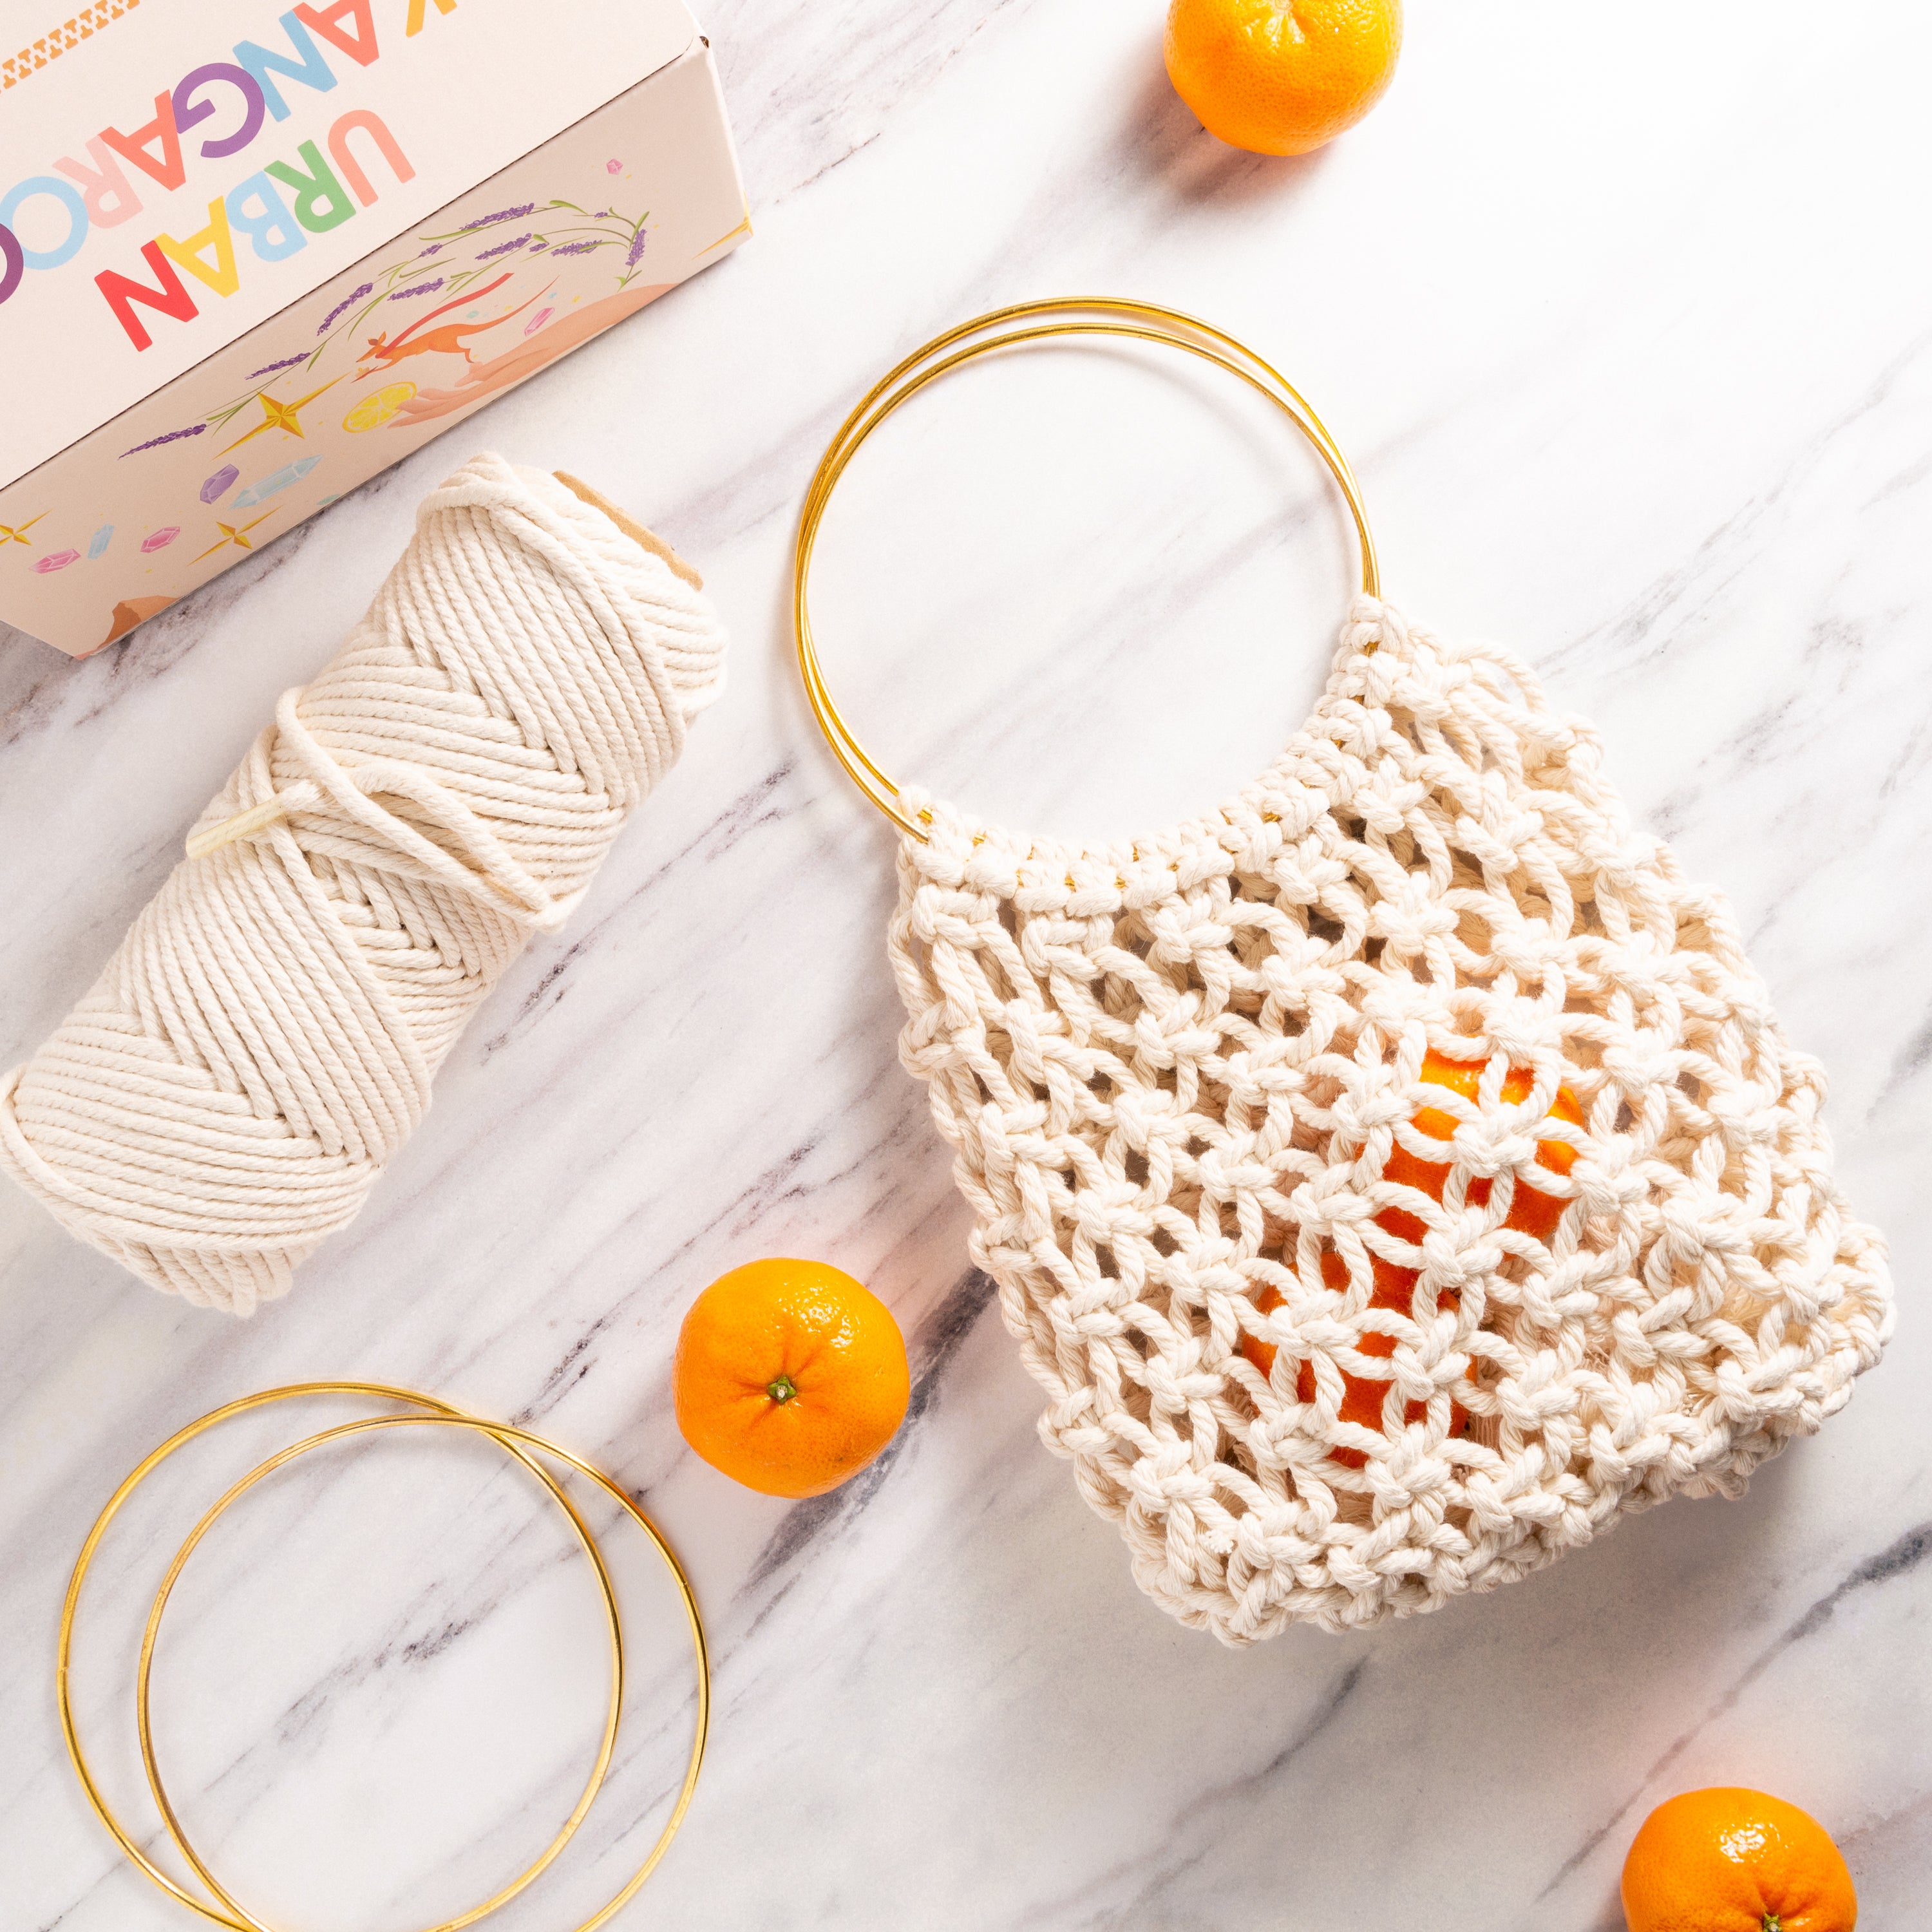 EASY Macrame Bag Tutorial with Round Handles - YouTube